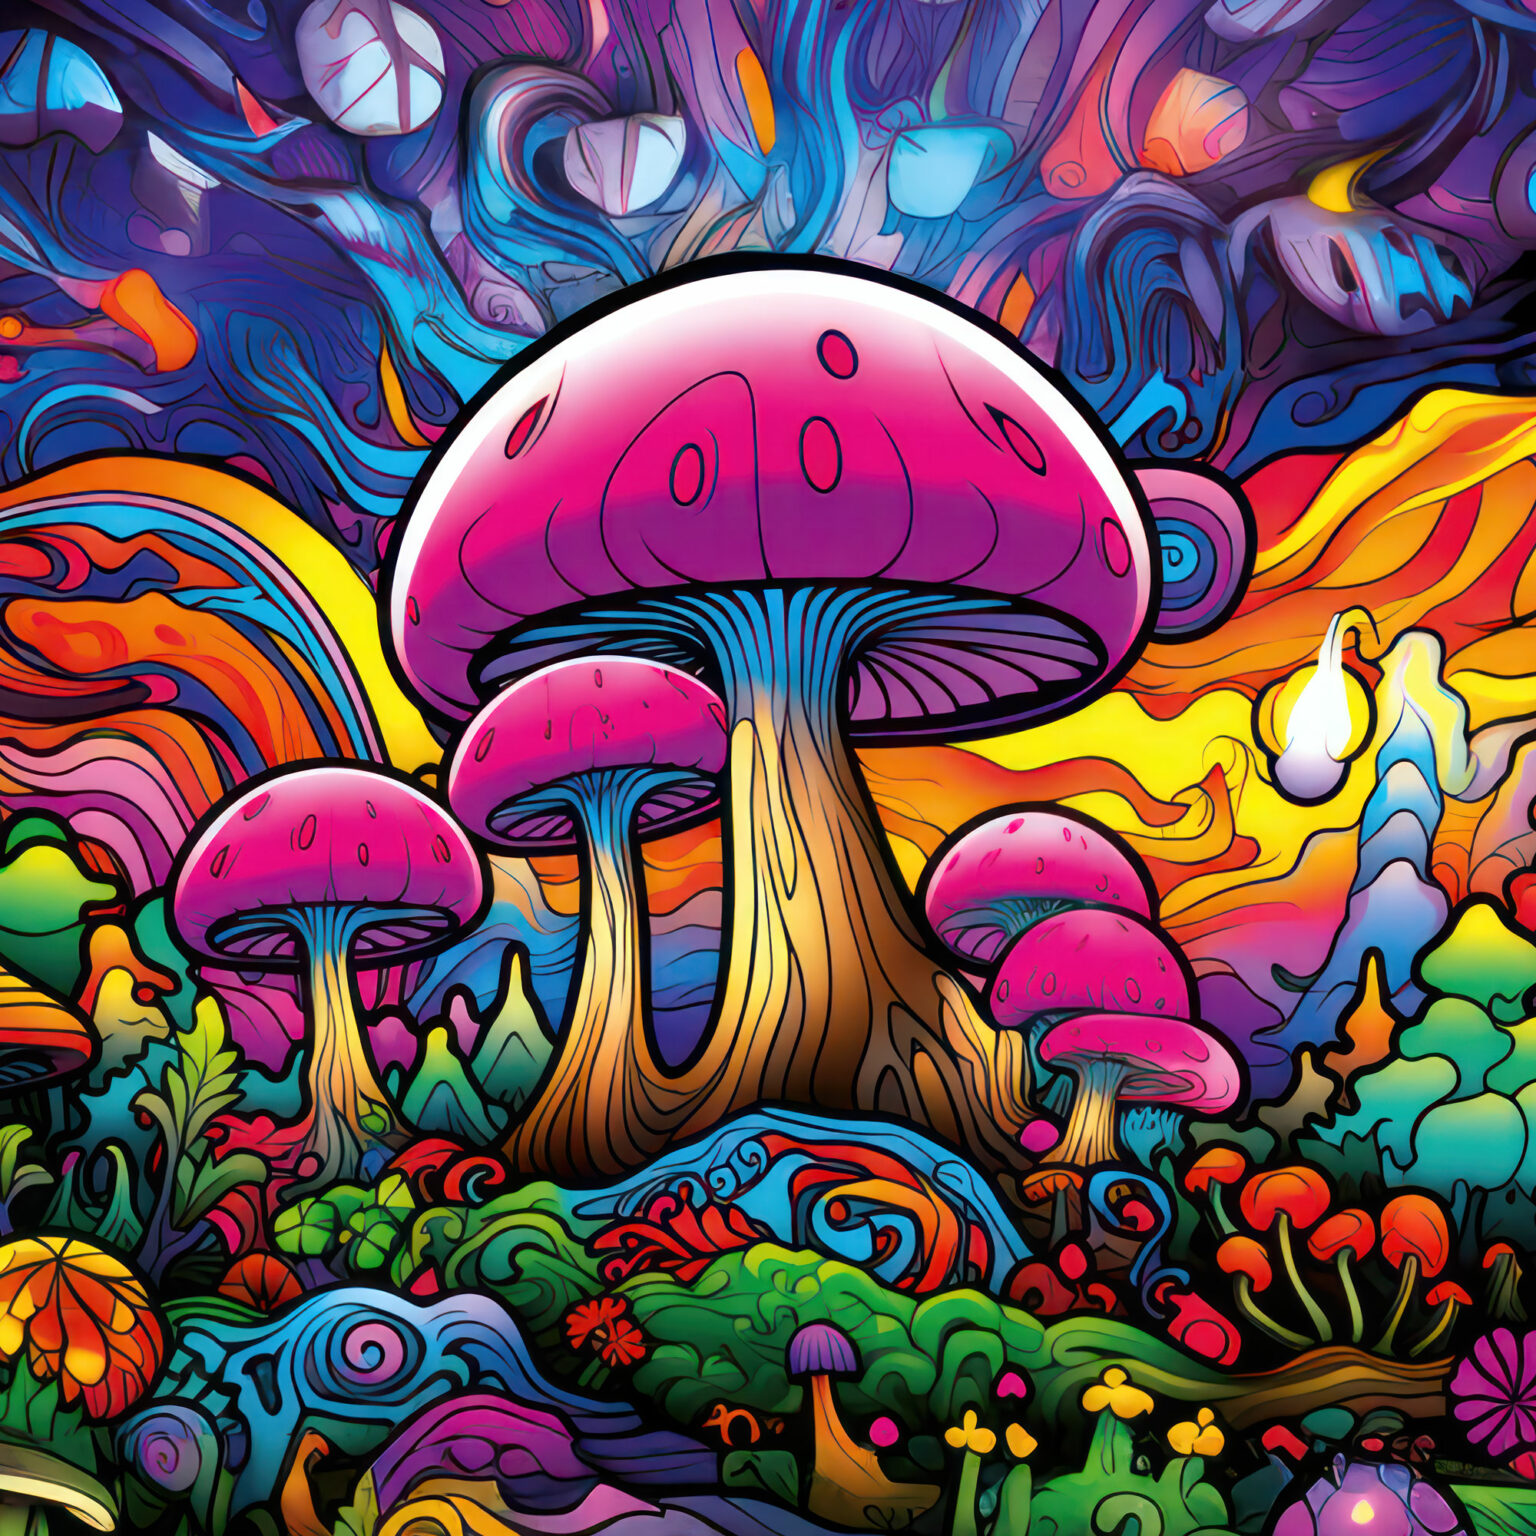 Magic Mushroom Wall Hanging, Psychedelic Backdrop Trippy Art, Blacklight Fluorescent UV Colorful, Party Decor, Bedroom Decor Stoner Gifts 11 - Details